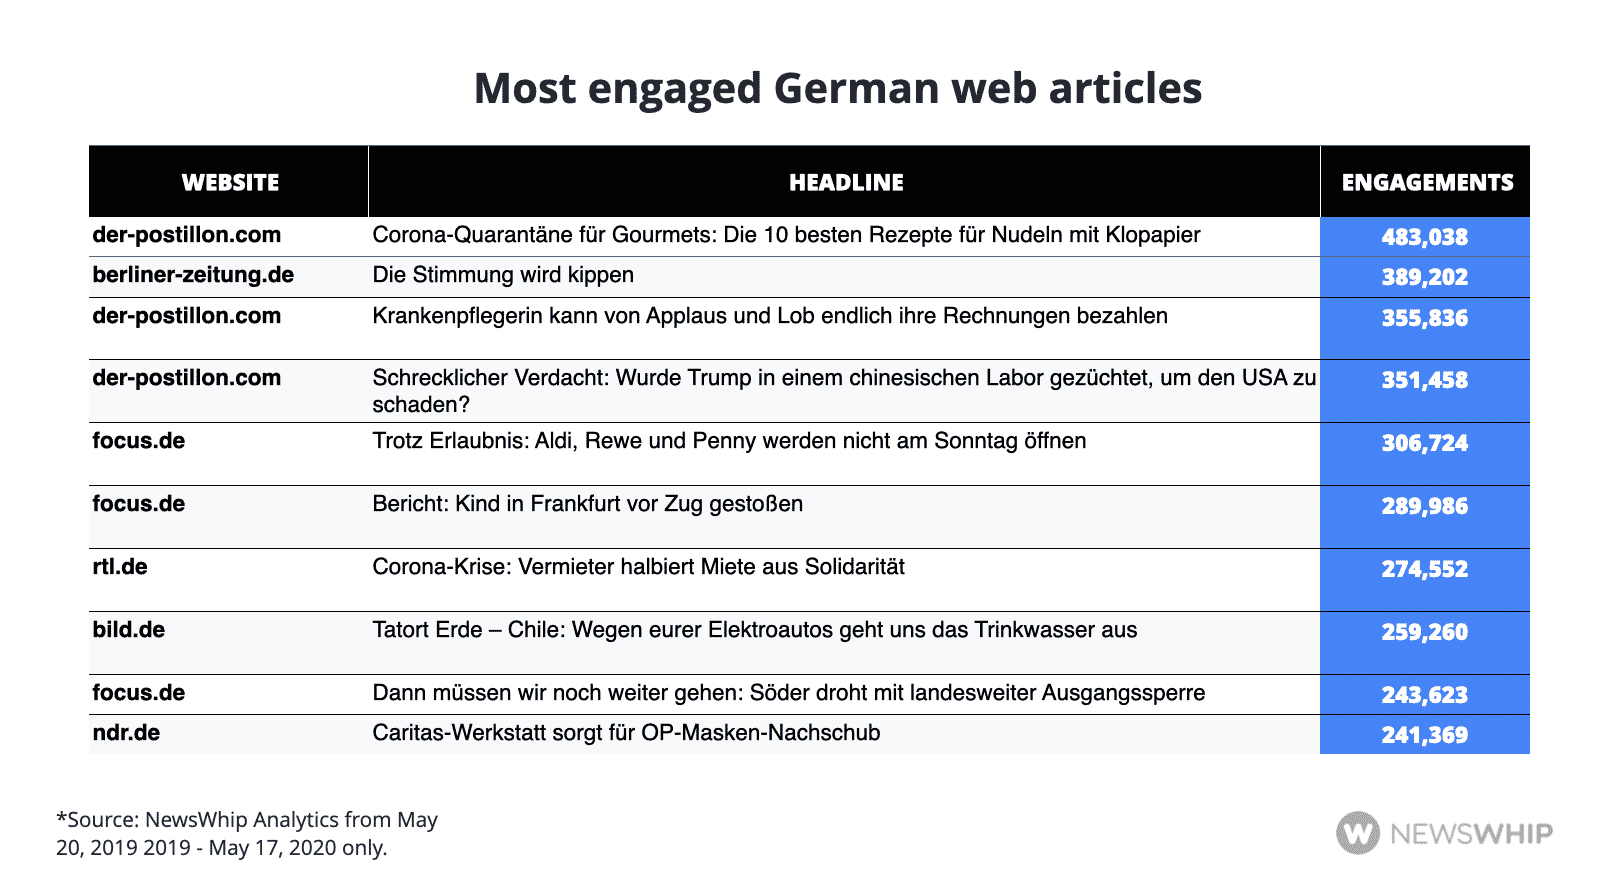 Chart showing the most engaged German articles, ranked by engagement